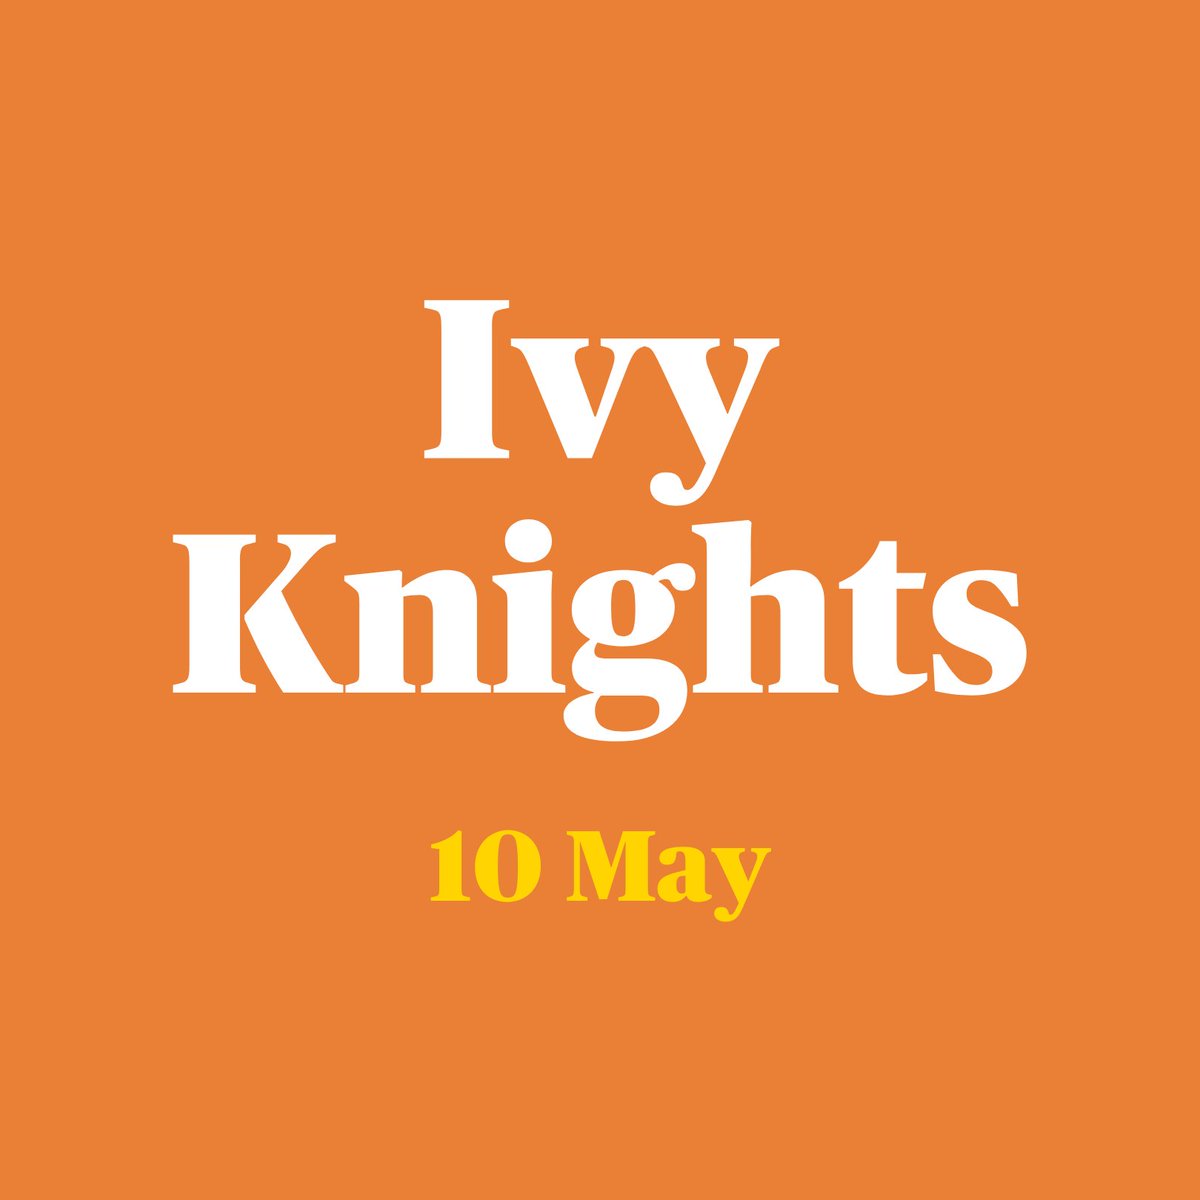 Fri 10 May... Ivy Knights comes to Foyer Jazz at Saffron Hall! Join Ivy Knights and her jazz trio on her musical odyssey as they captivate audiences with their musicianship, creativity and craftsmanship ❗Book Now❗Link Below⬇️ ow.ly/LsAf50RyoN3 #IvyKnights #FoyerJazz